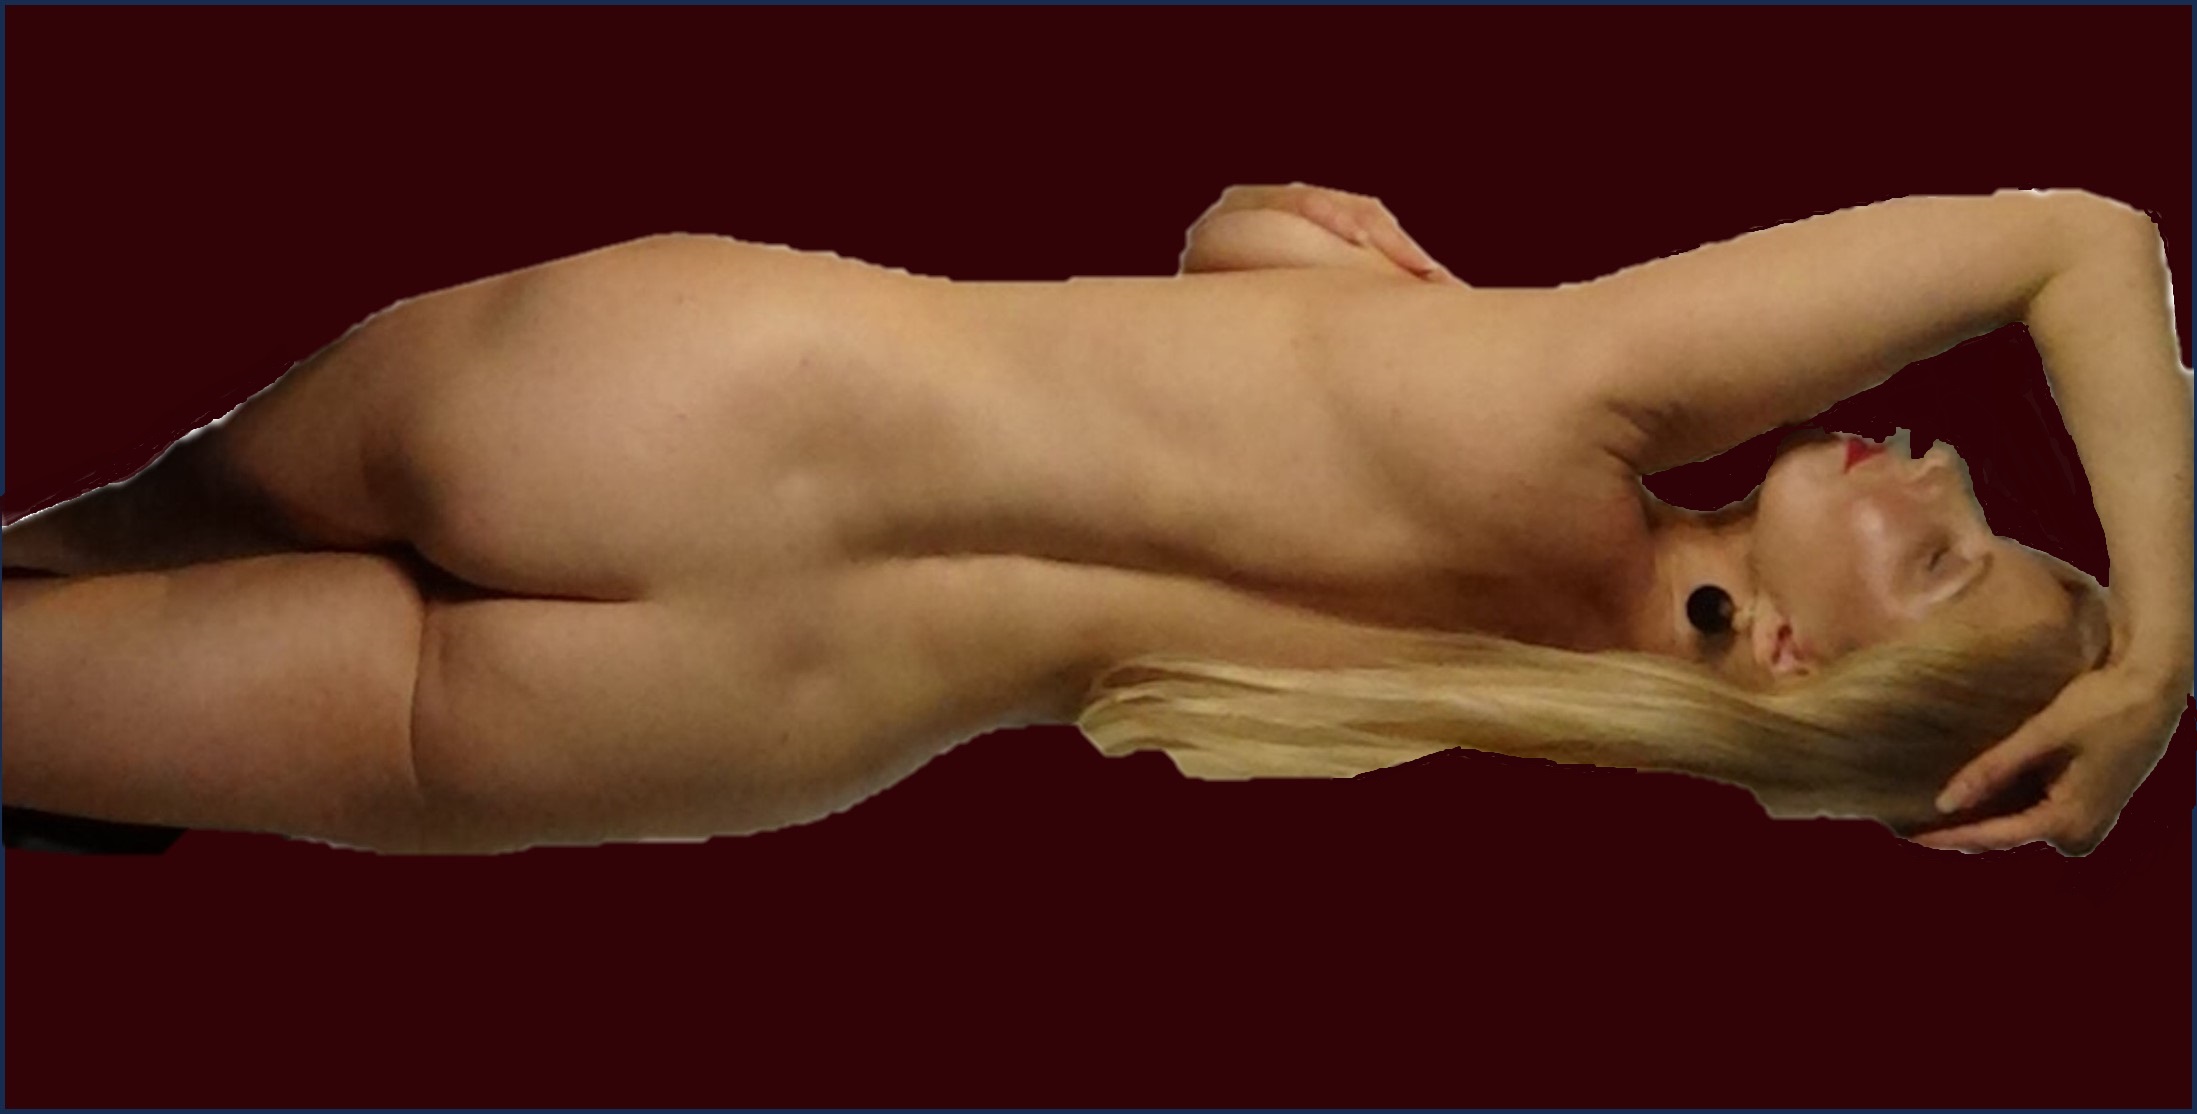 Francesca is a Naturist Massage Therapist. She is pictured lying naked, her back facing the camera